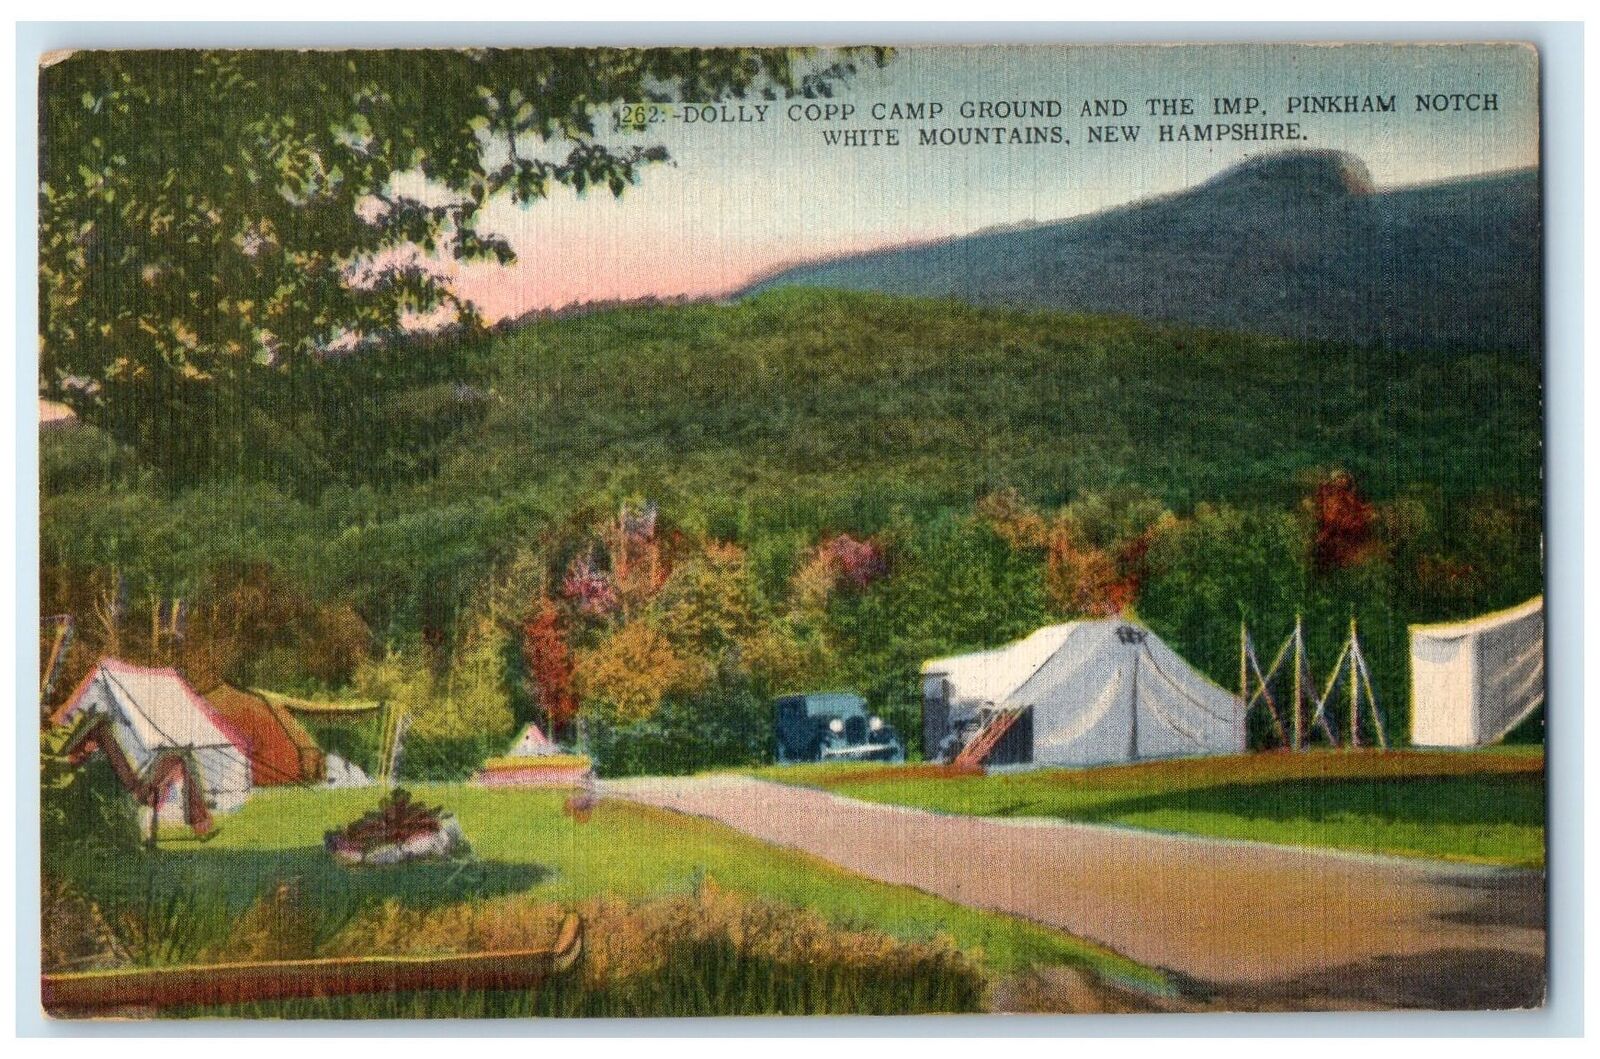 c1940's Dolly Copp Camp Ground Tents White Mountains New Hampshire NH Postcard